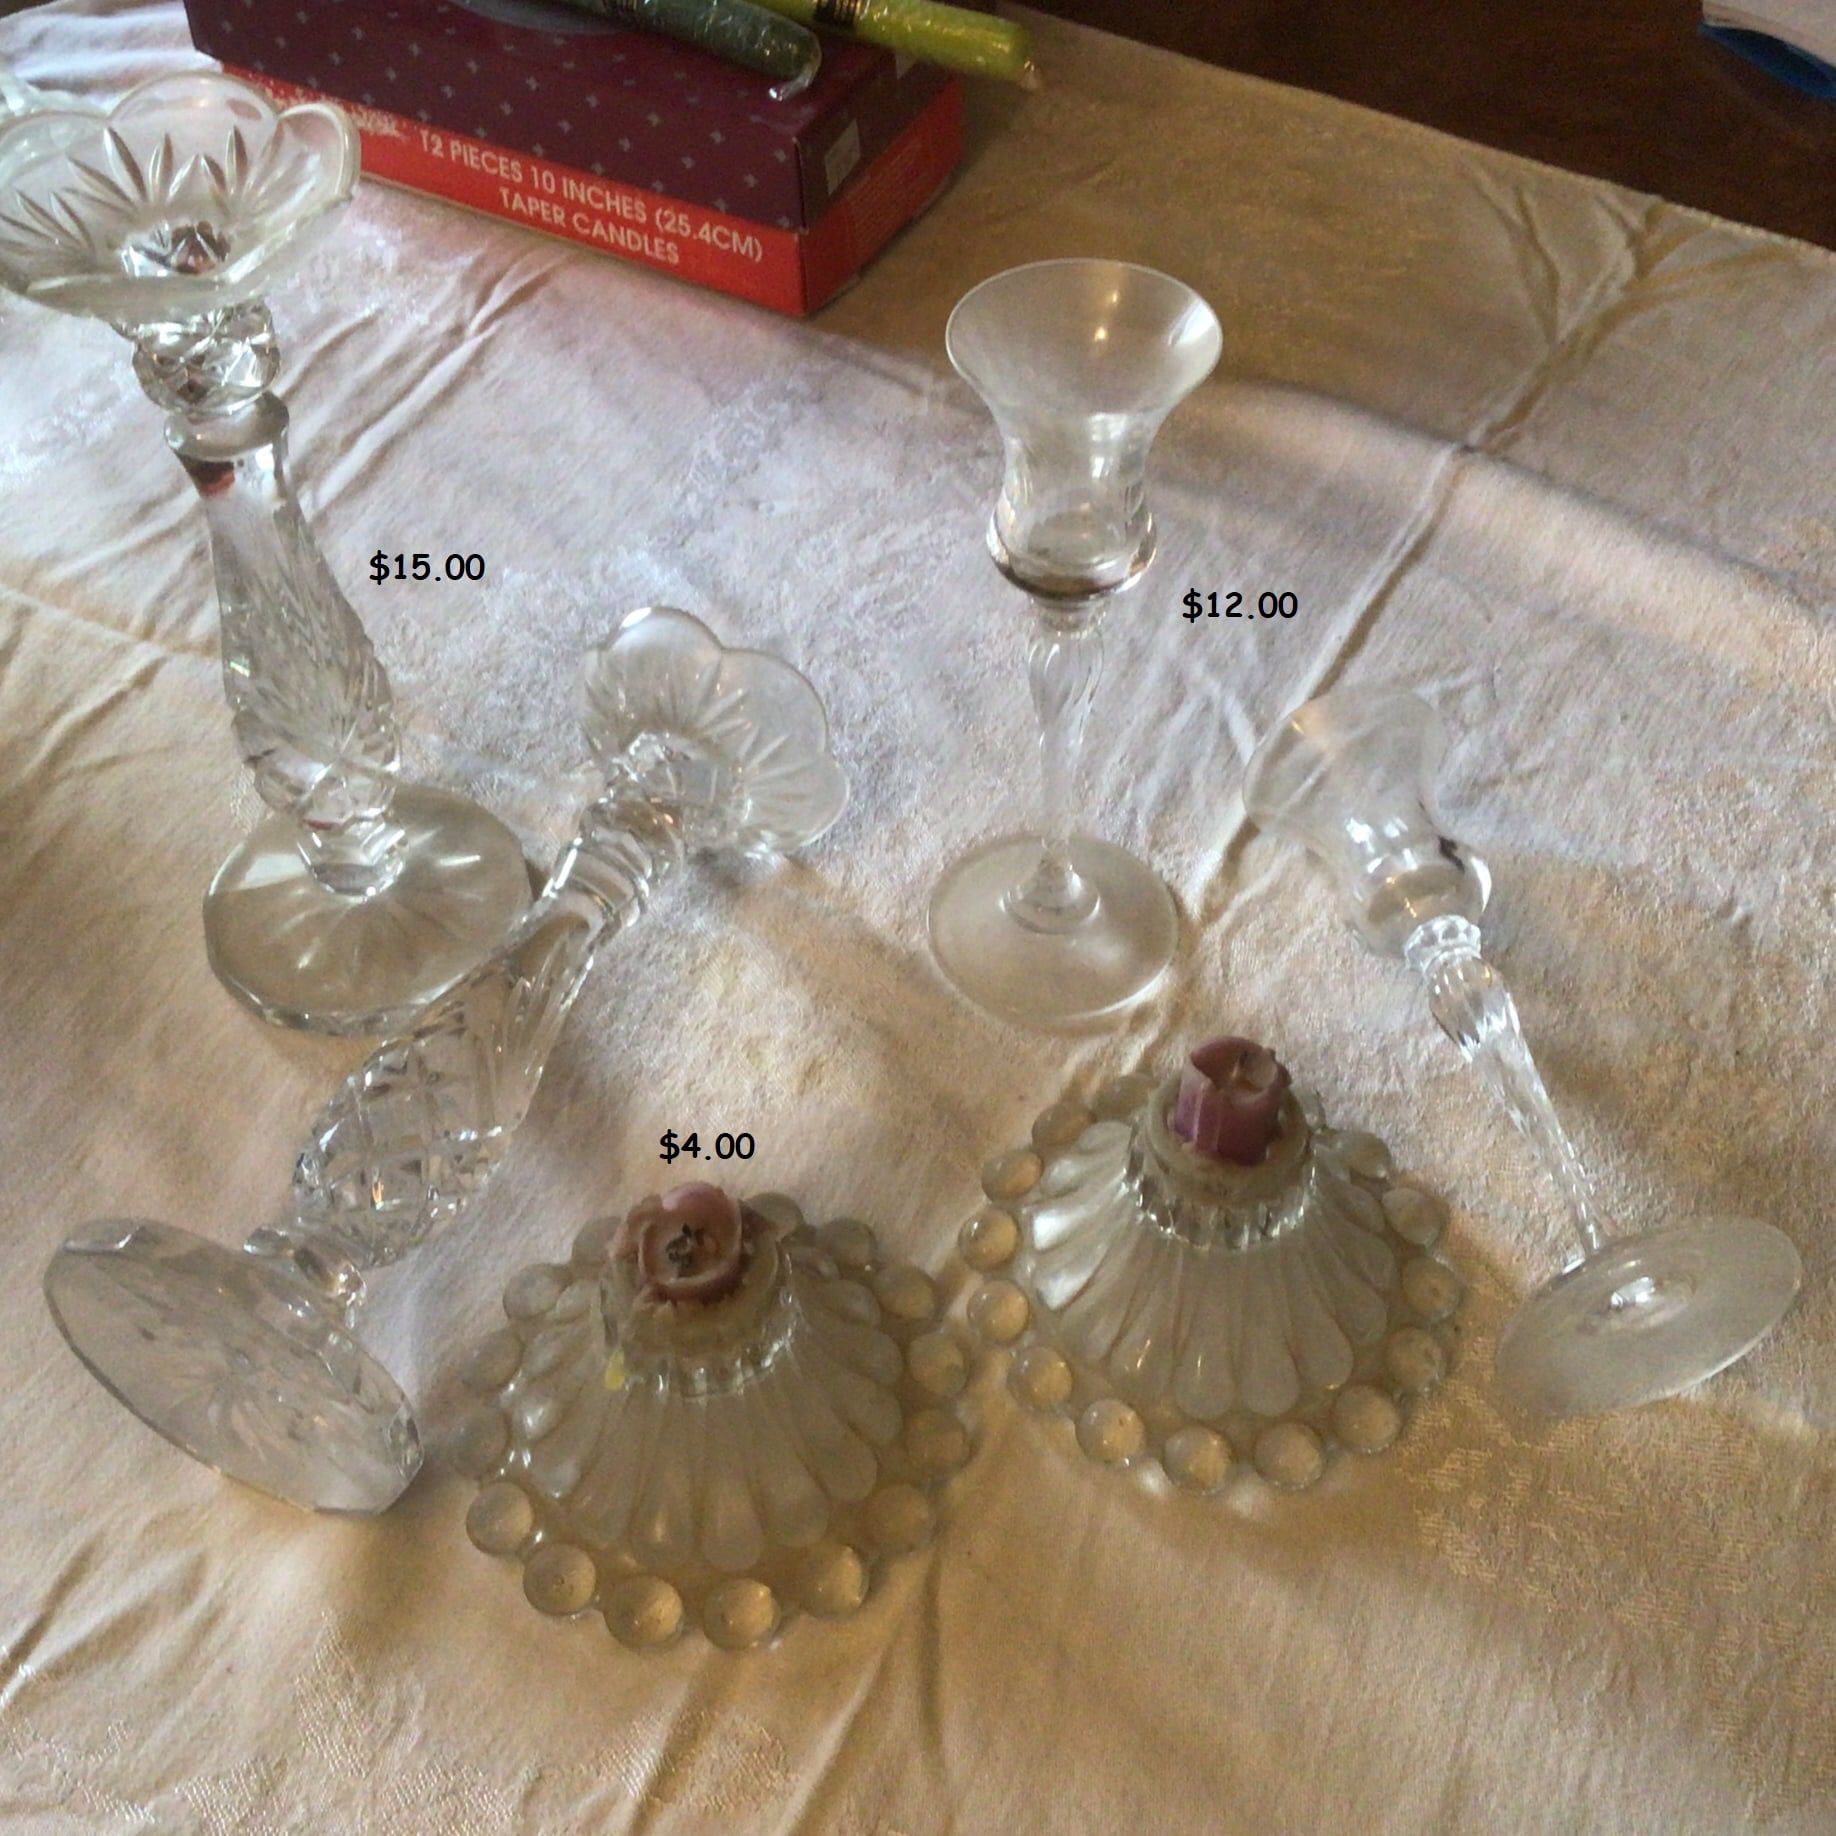 CANDLE STICKS/HOLDERS AND TAPER CANDLES